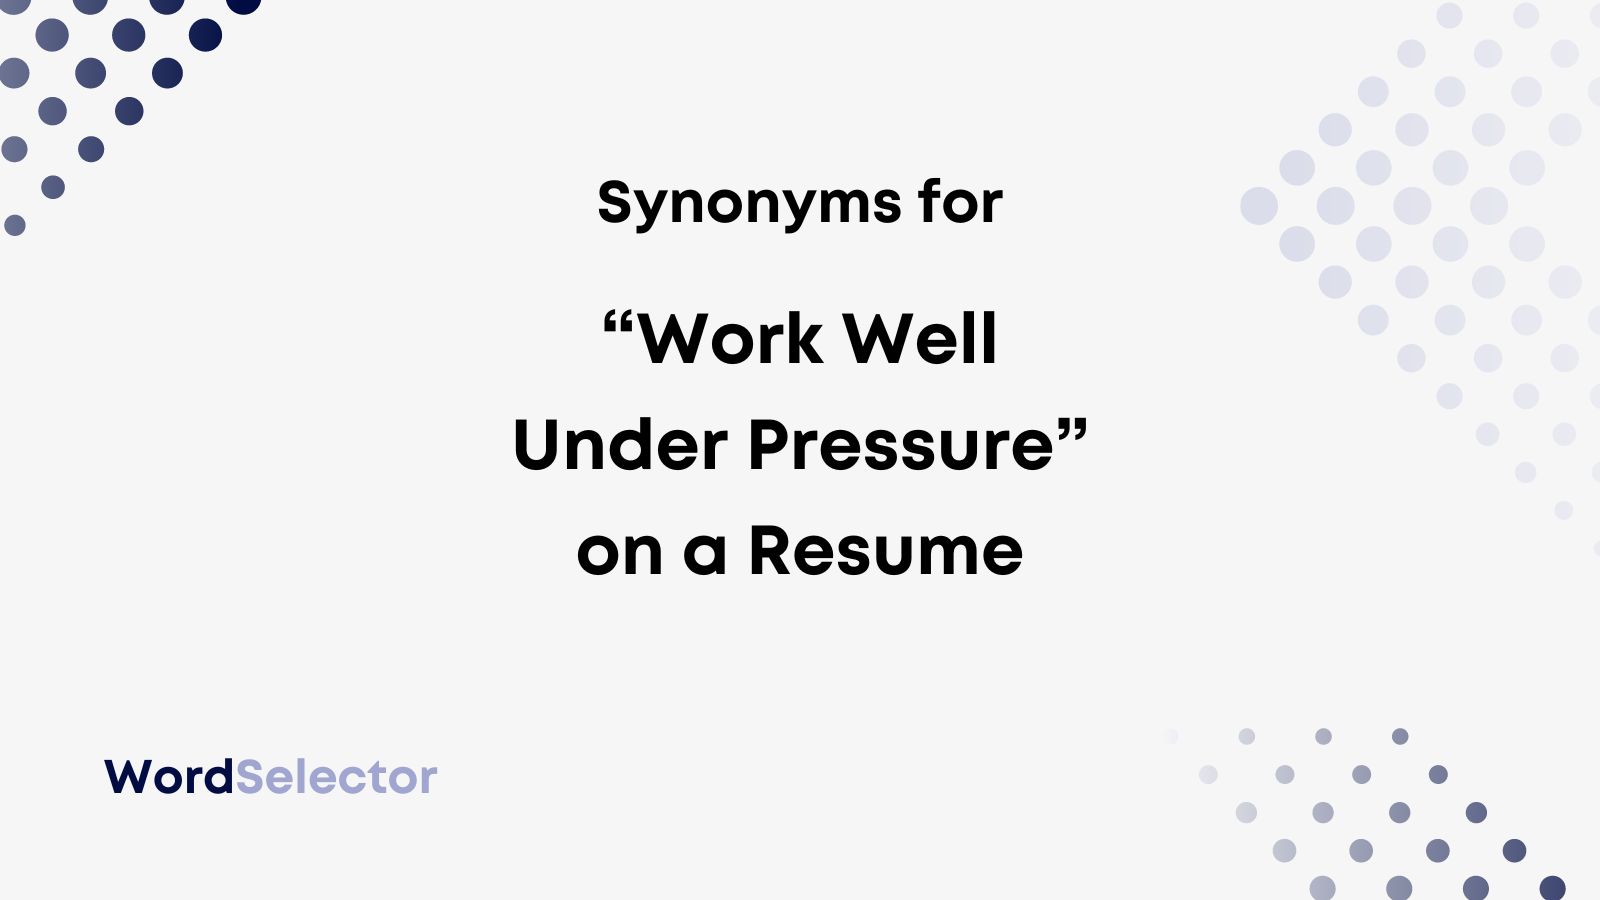 13 Synonyms for “Work Well Under Pressure” on Your Resume